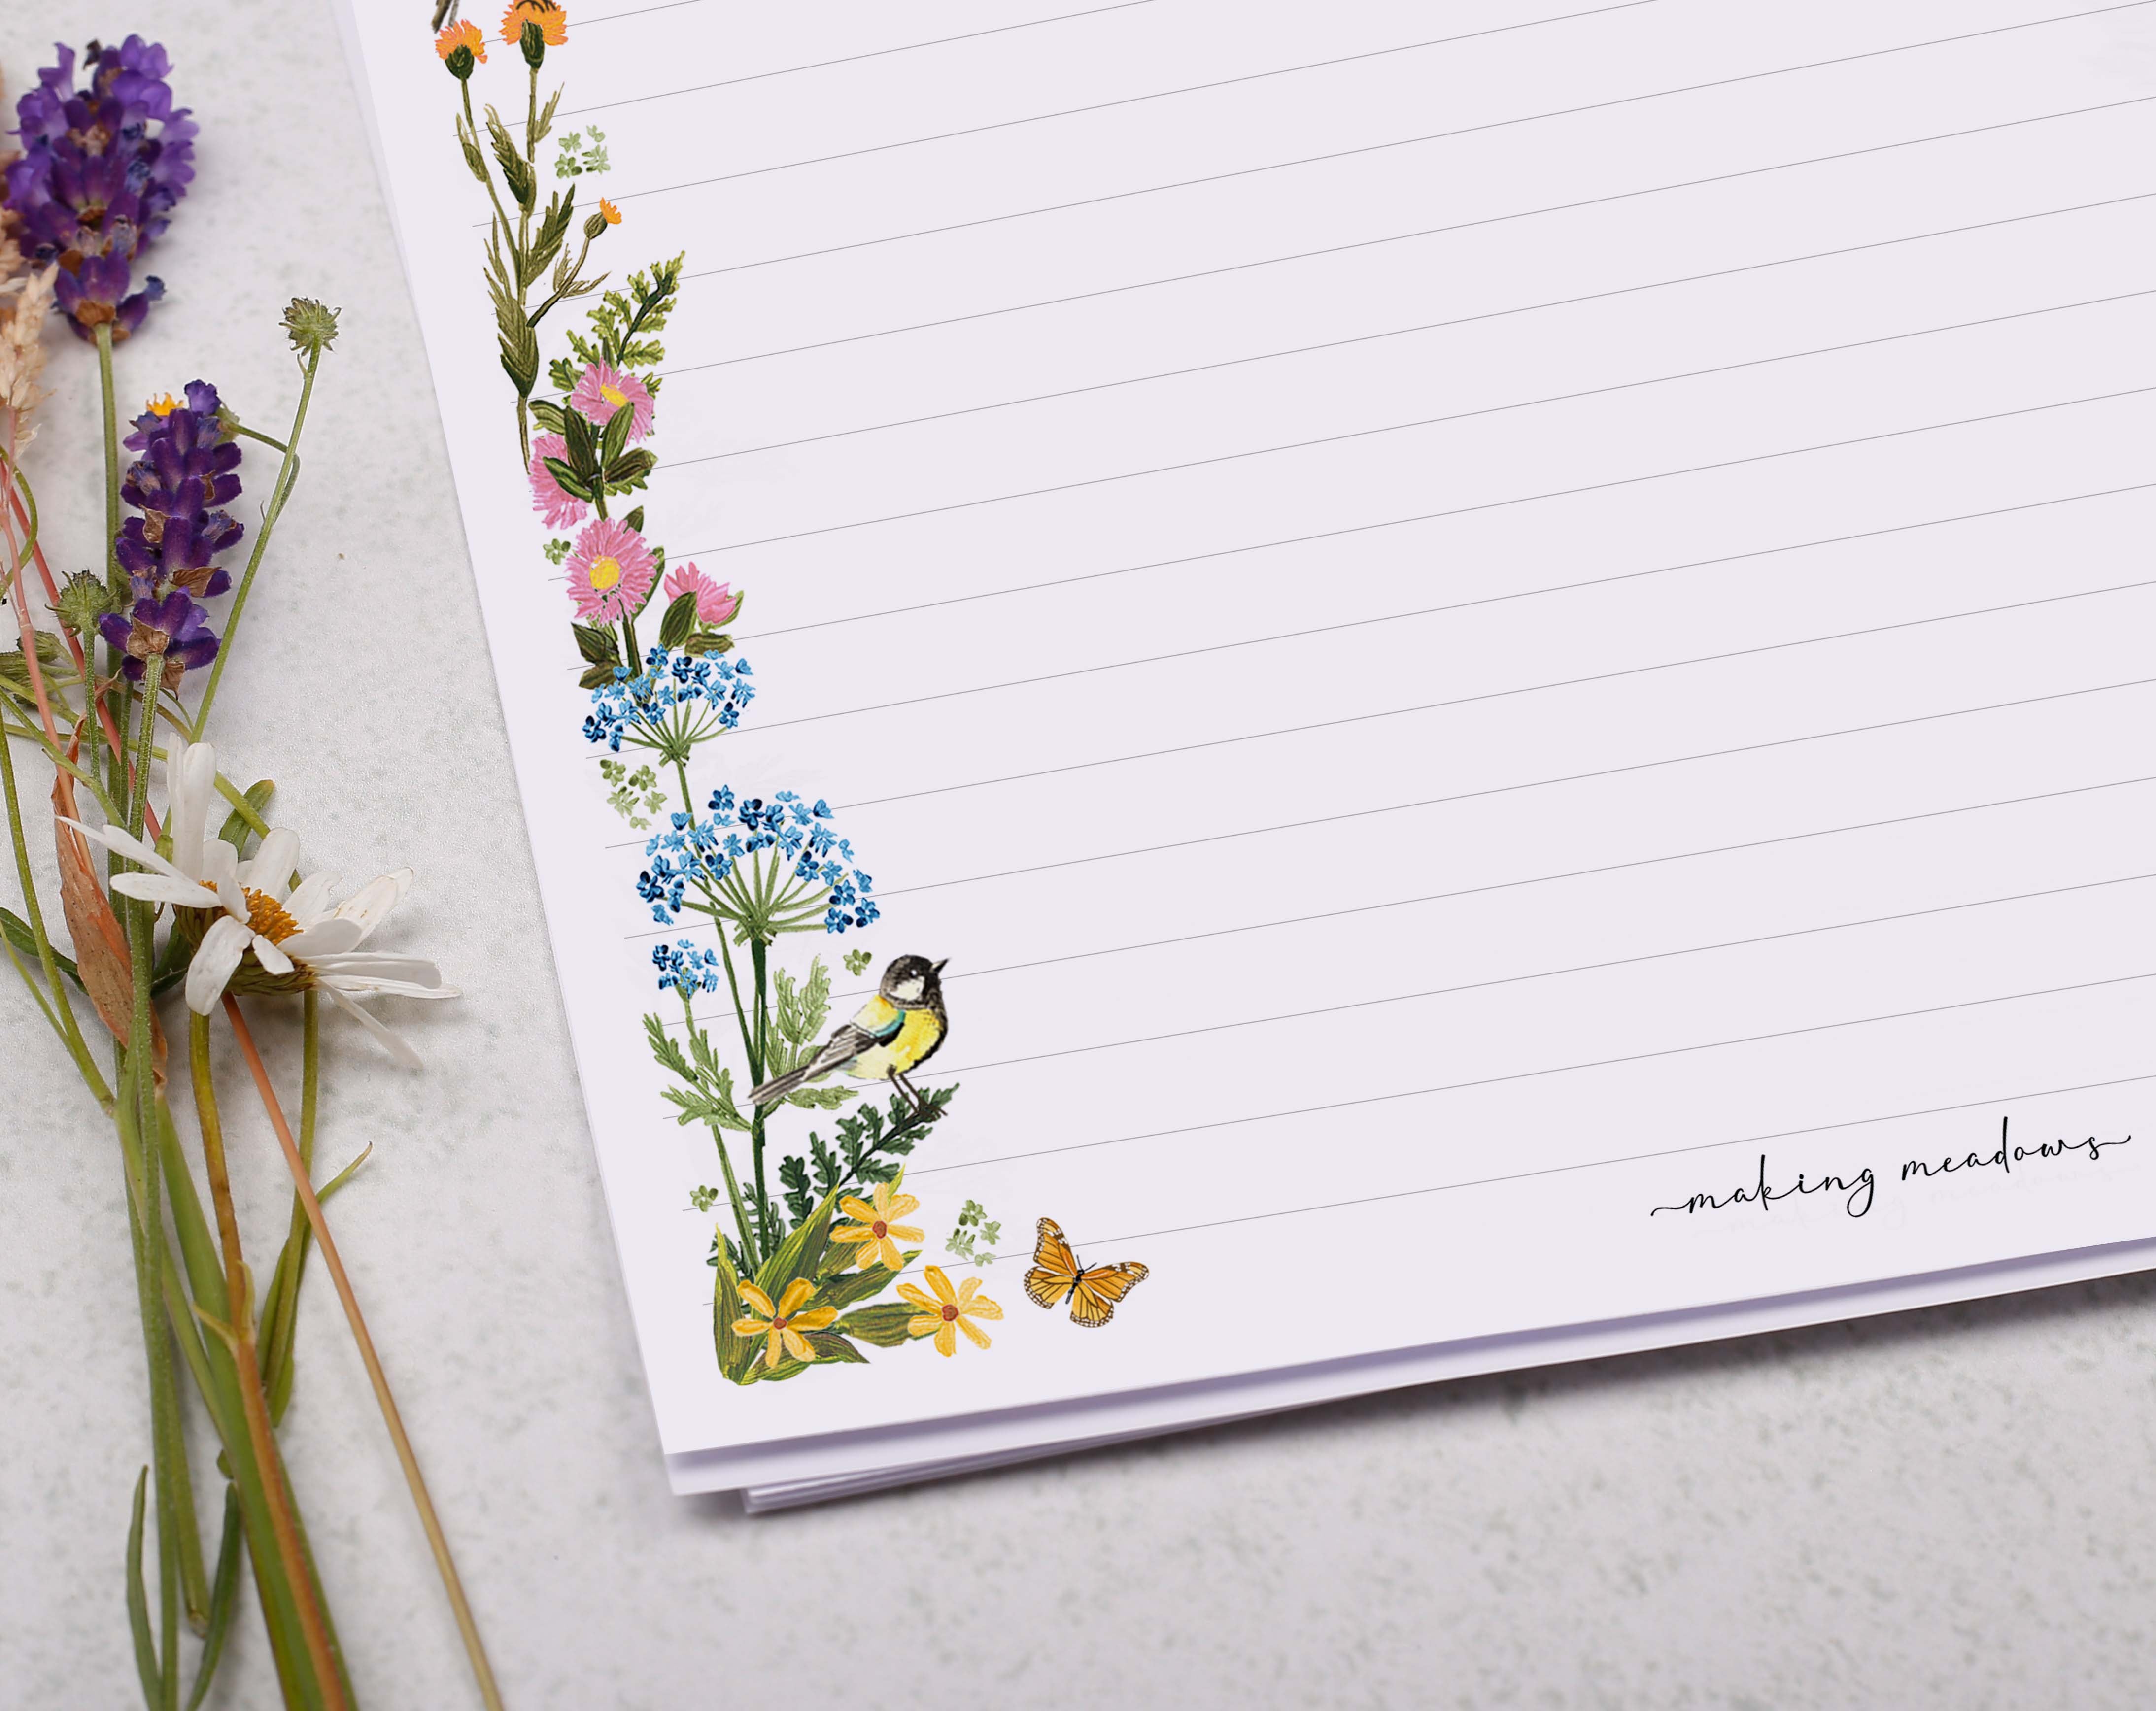 A4 writing paper with a ditsy floral meadow border